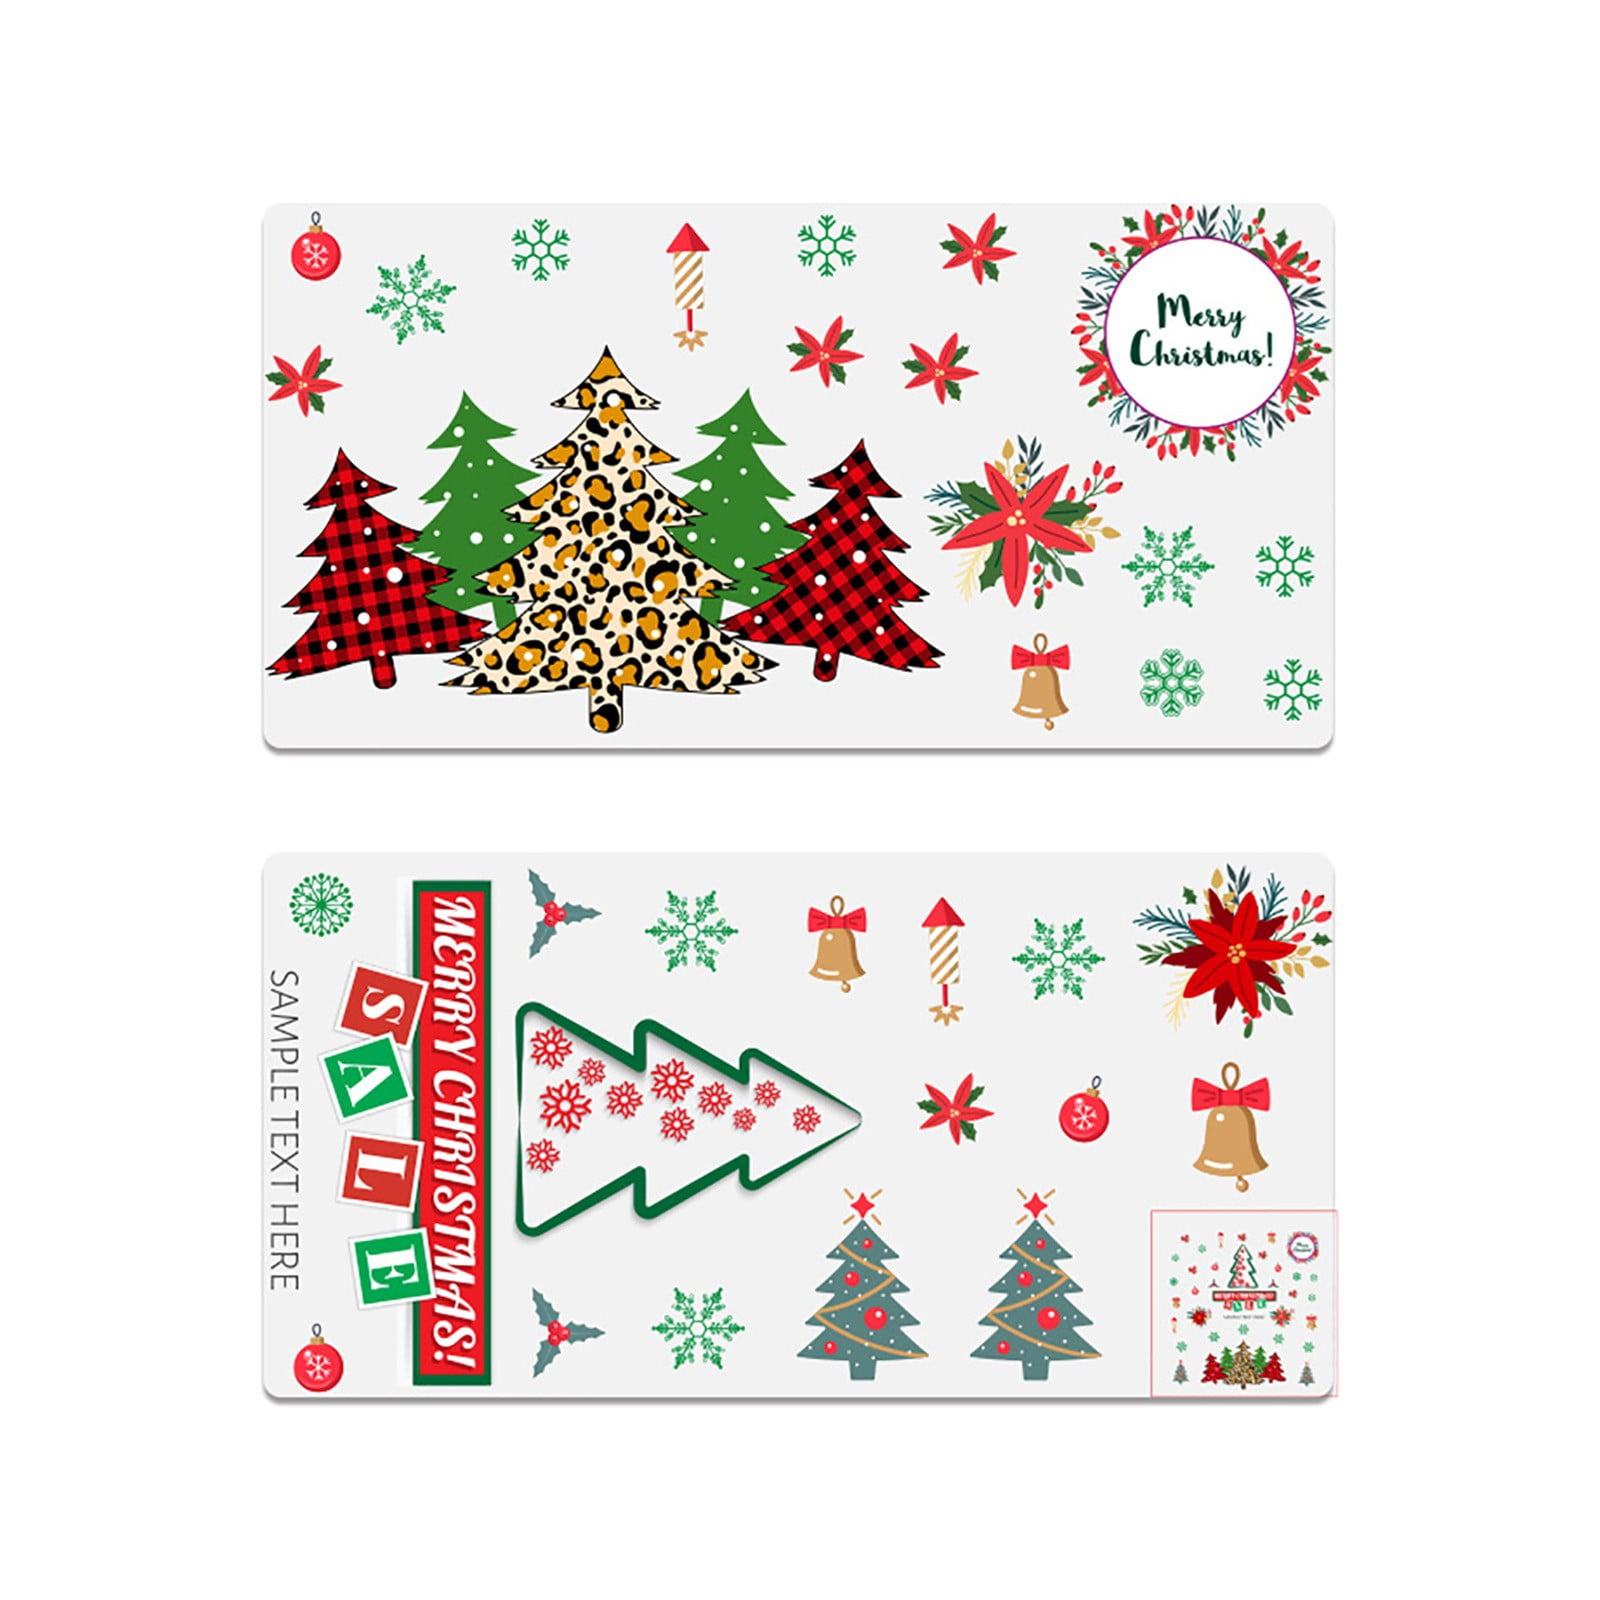 Self Adhesive Merry Xmas Crafting Gift Party Bag Filler Present Scrapbook Stockings Santa Claus Card Making Supplies for Kids Trees Christmas Decorating 3 Pack Sticker Sheet